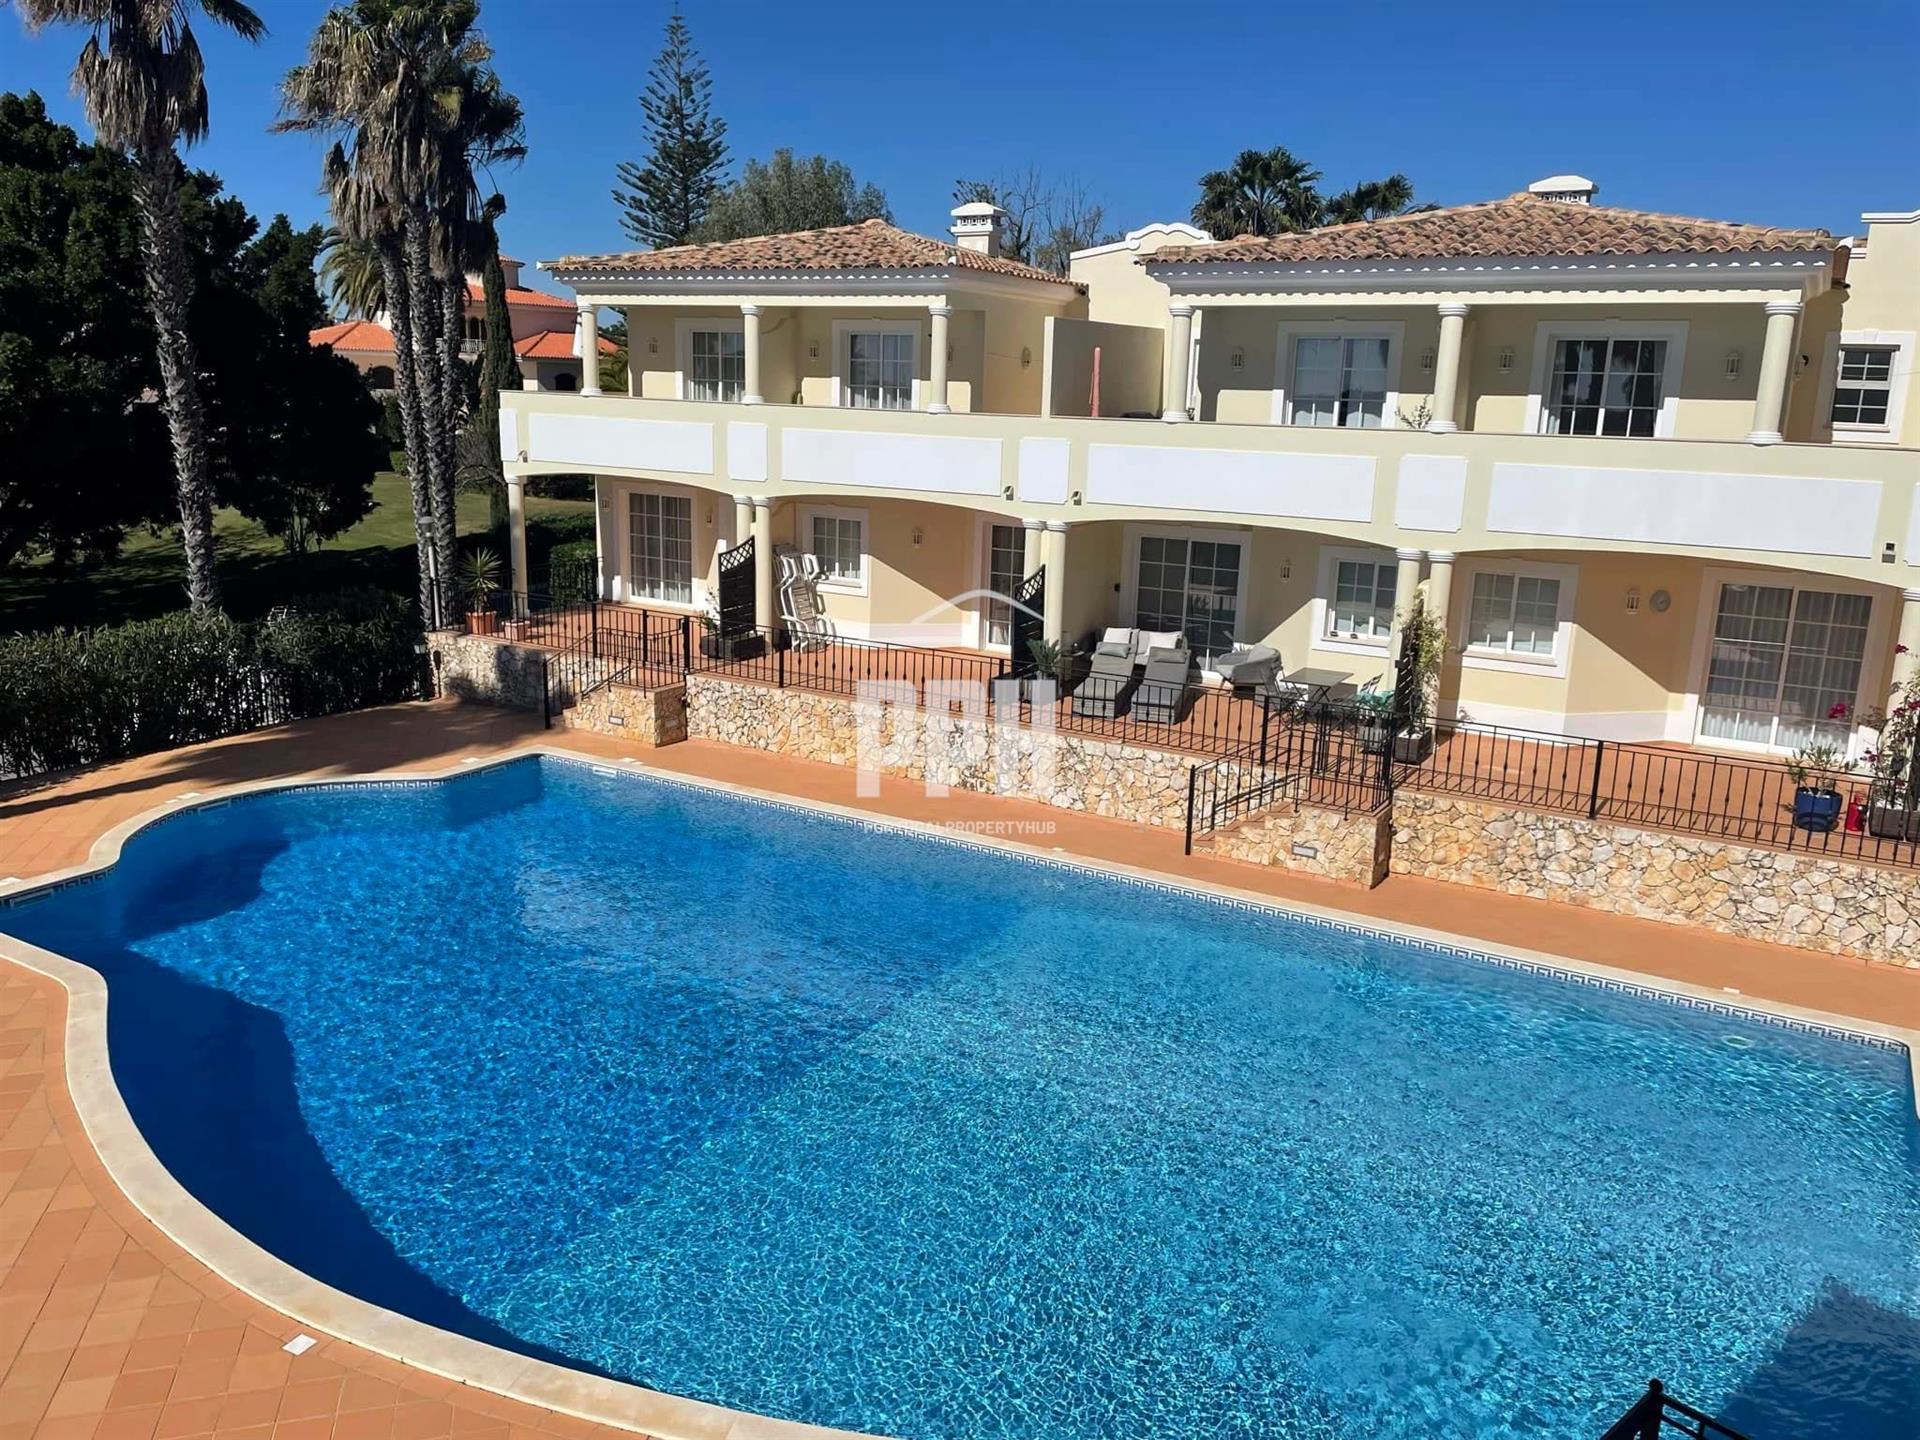 Sunset Terrace - 3 Bedroom Townhouse in Quinta da Madeira- Vale Formoso